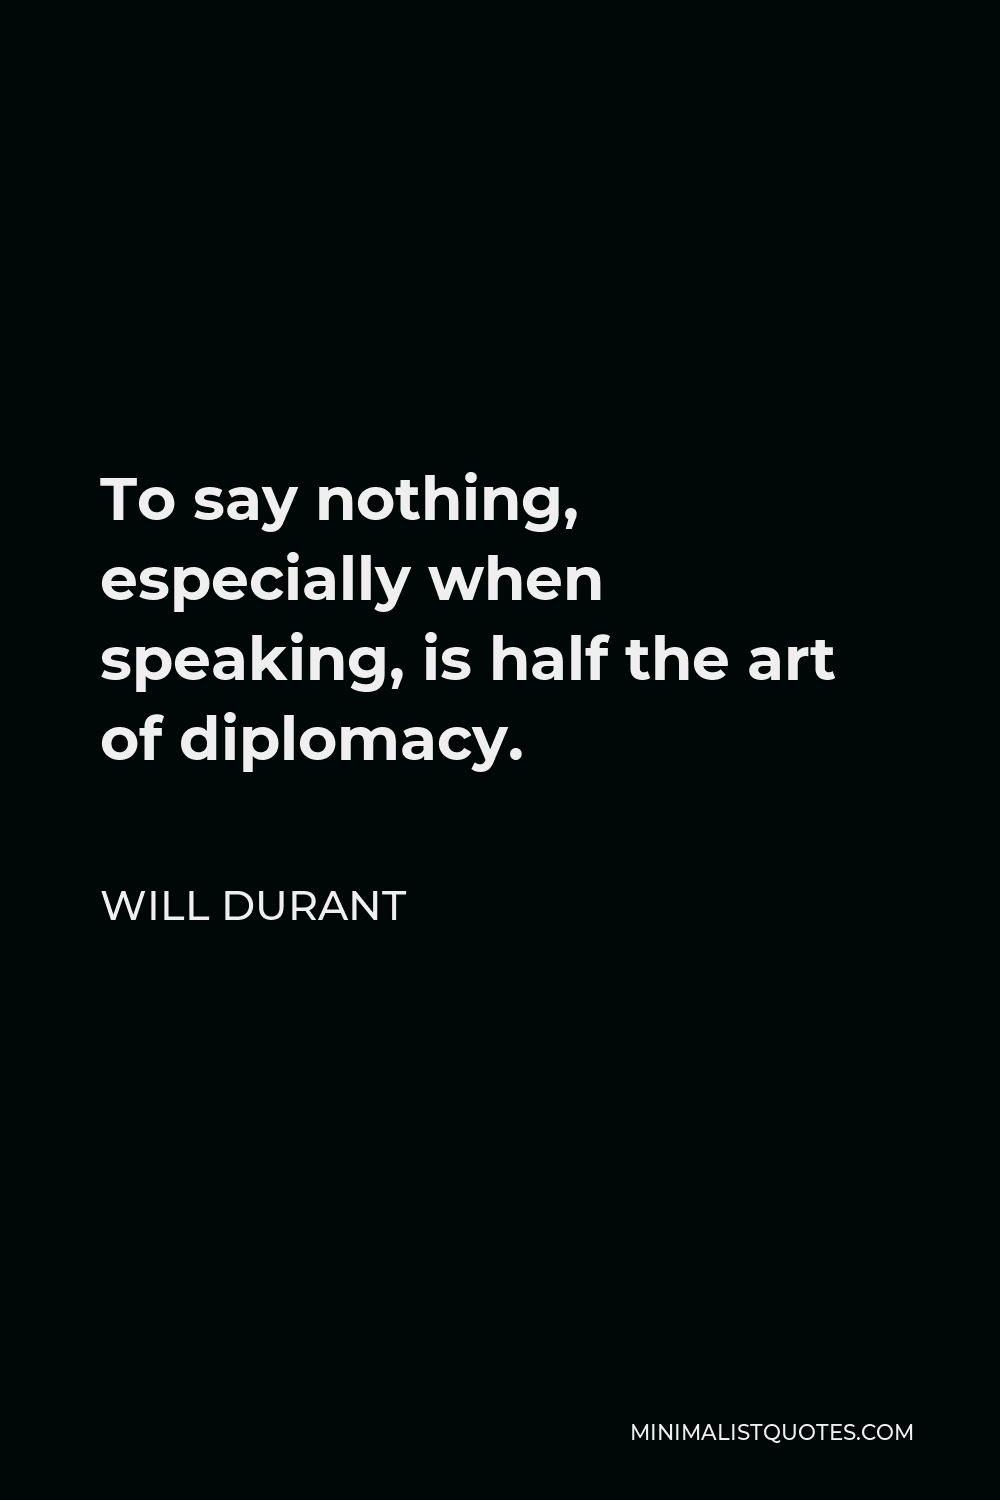 Will Durant Quote - To say nothing, especially when speaking, is half the art of diplomacy.